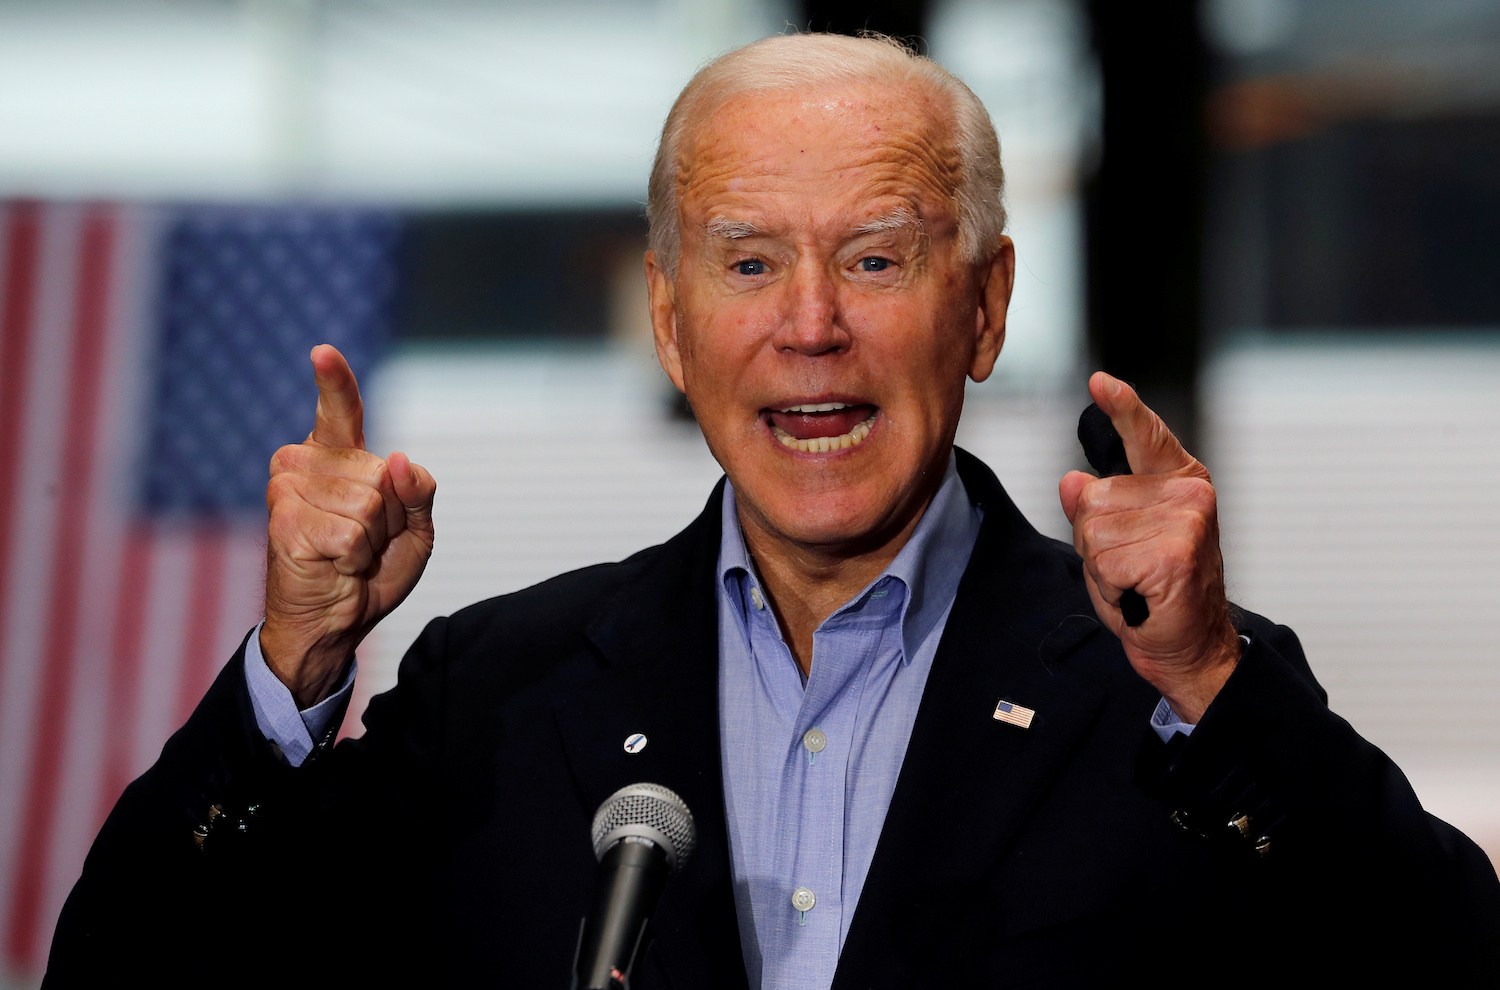 What a Joe Biden win could mean for financial policy